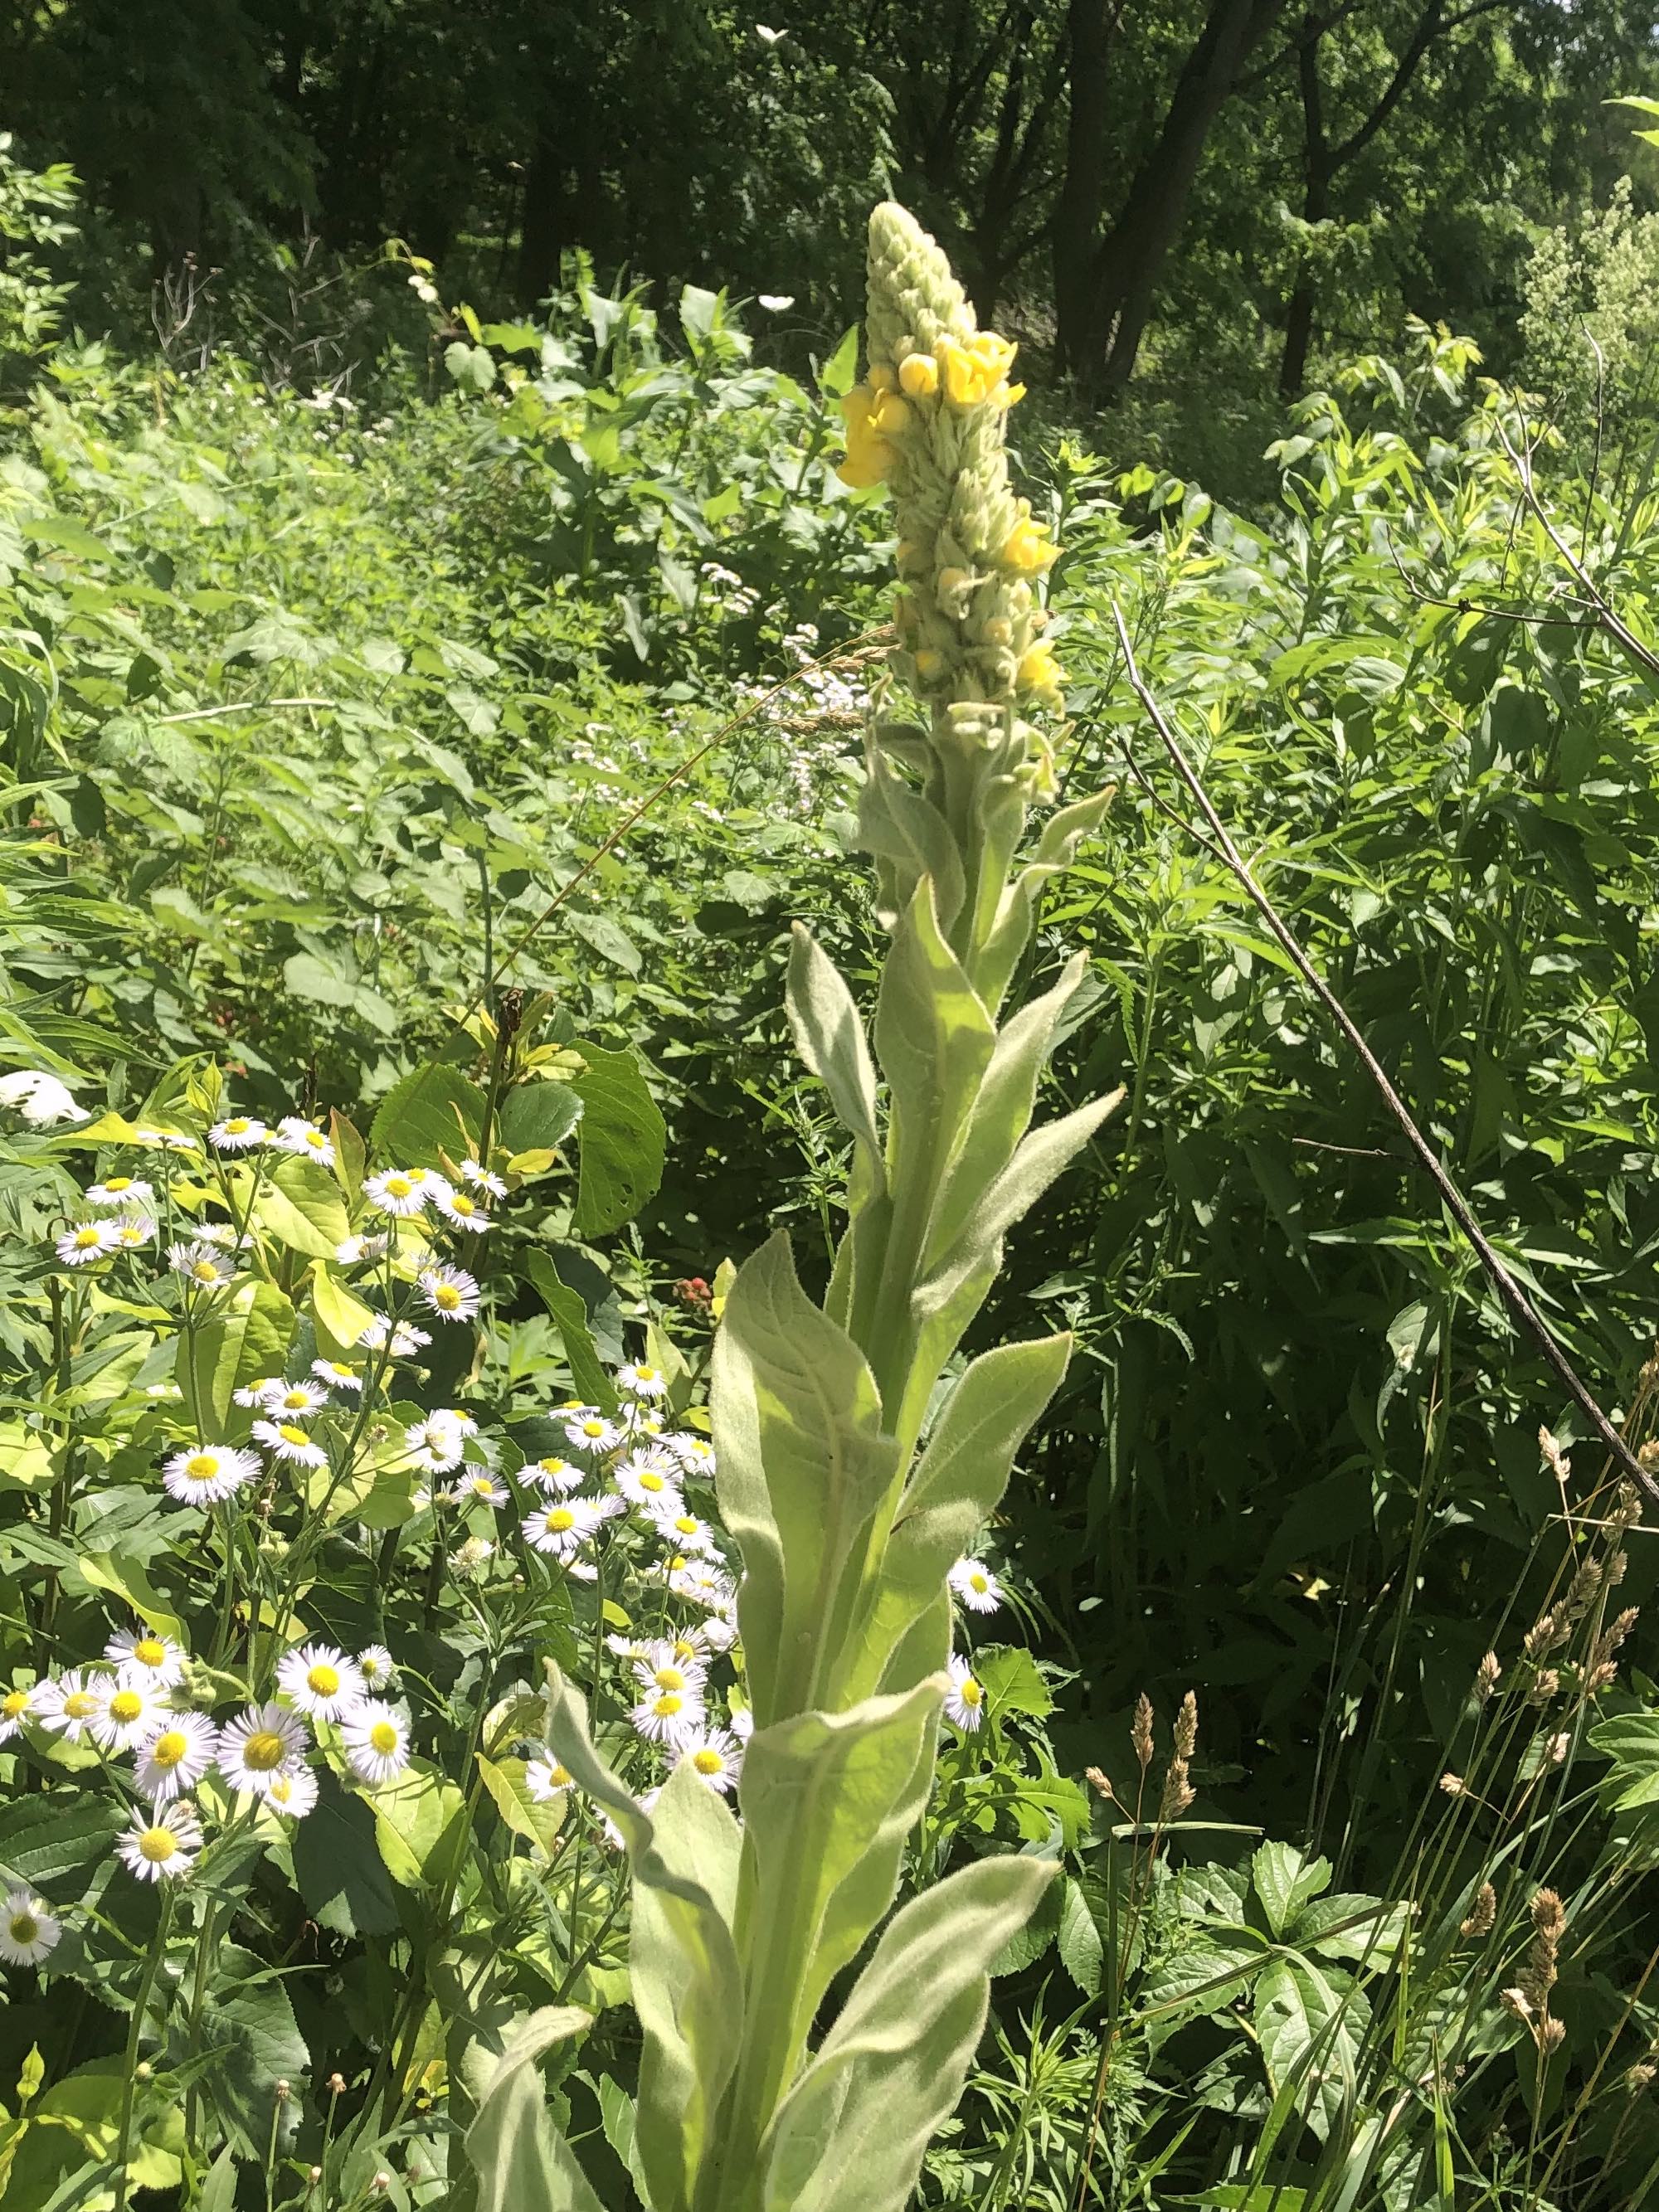 Common Mullein on shore of Marion Dunn Pond on June 27, 2020.